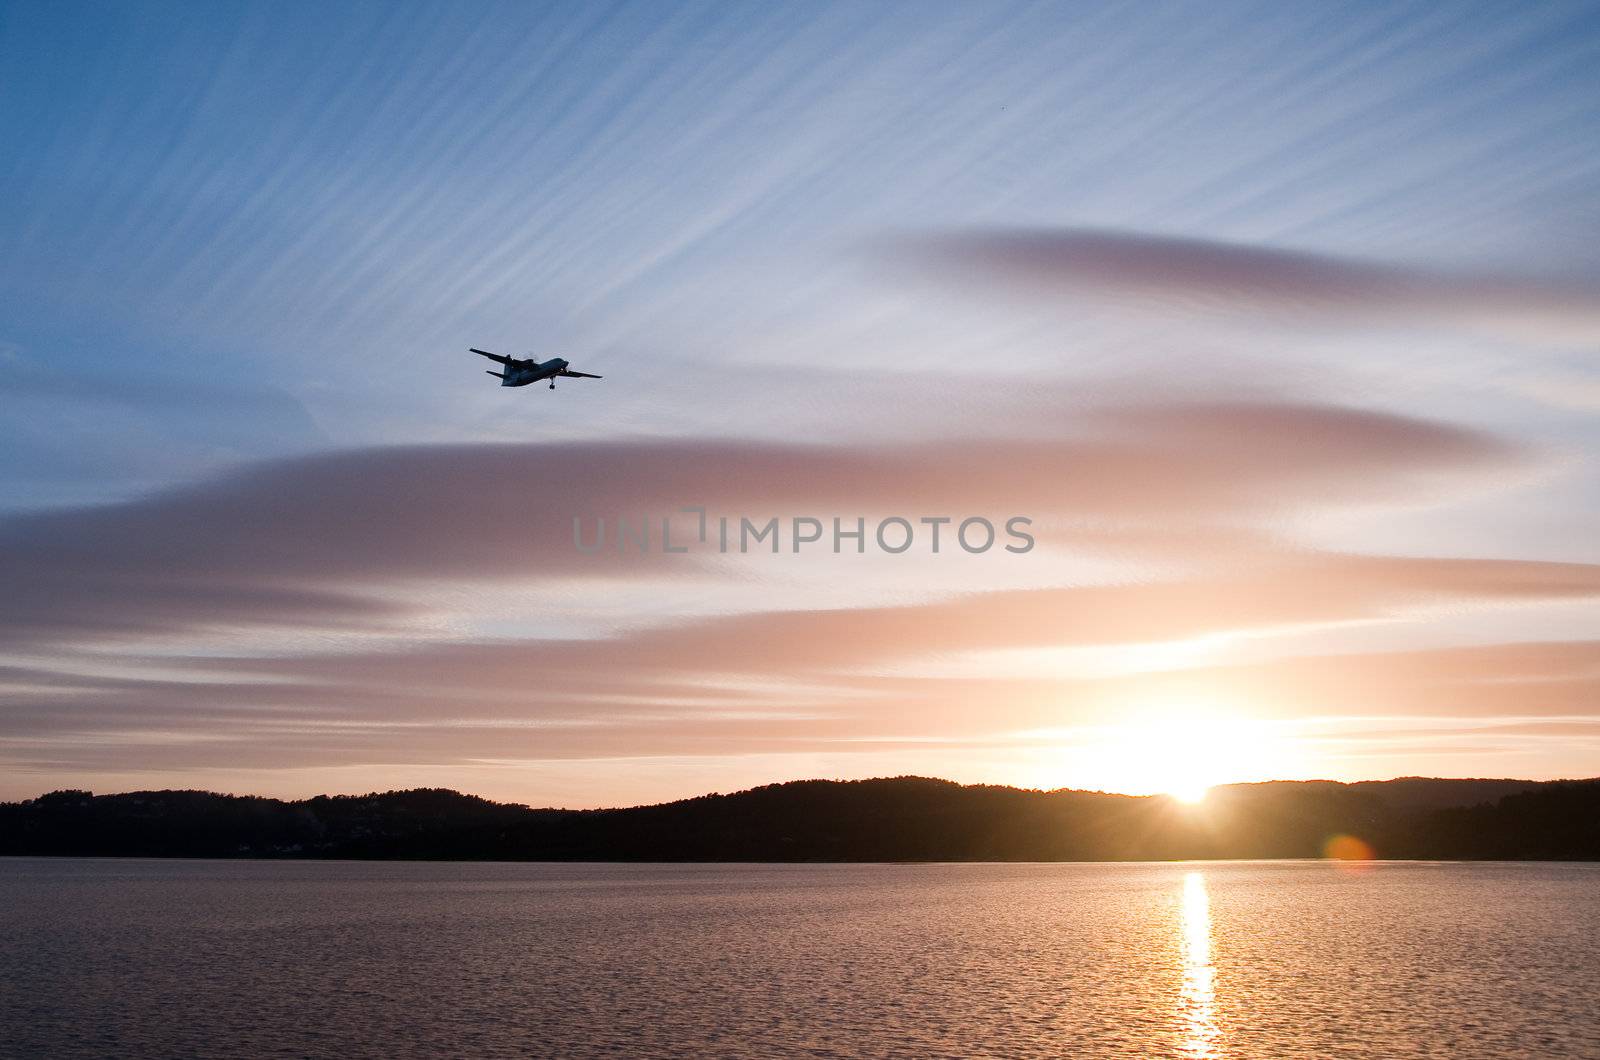 Airplane in the sunset over the water with blue sky and hills in the background